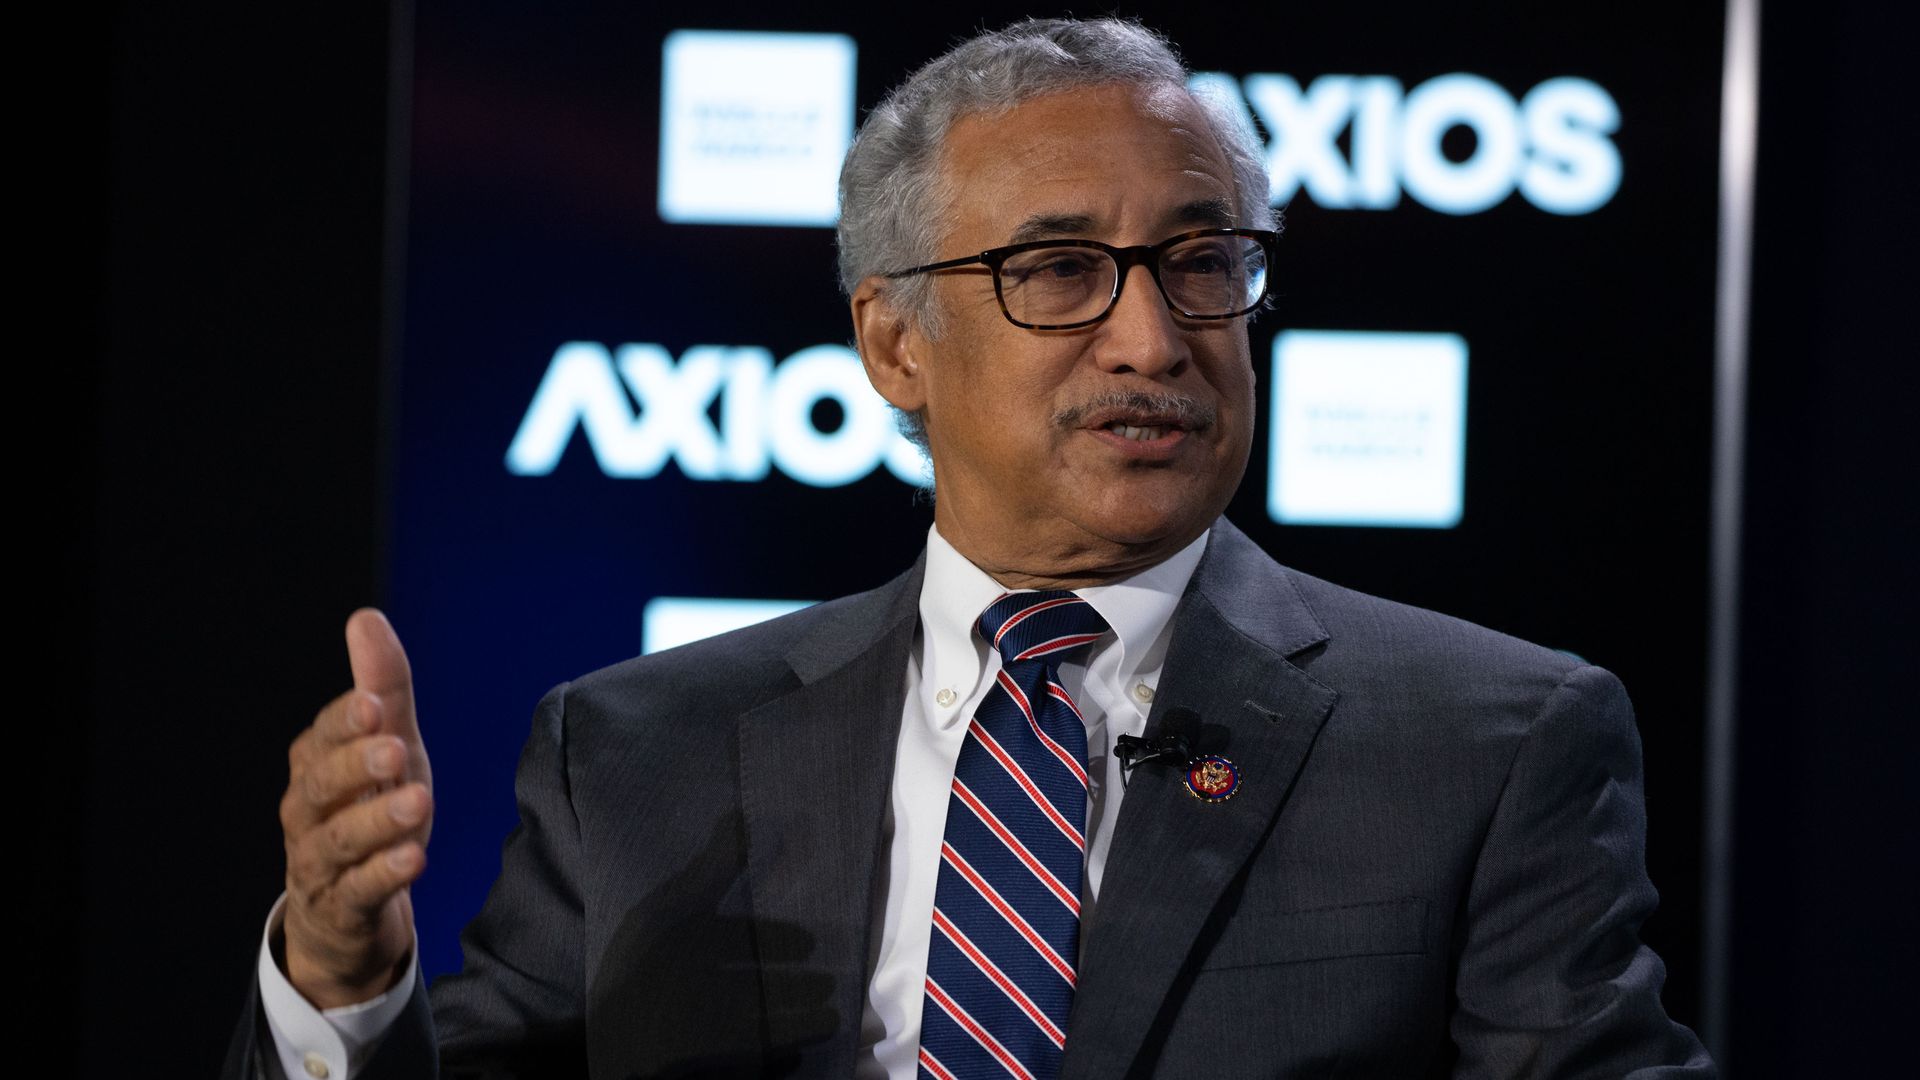 Rep. Bobby Scott on the Axios stage. 